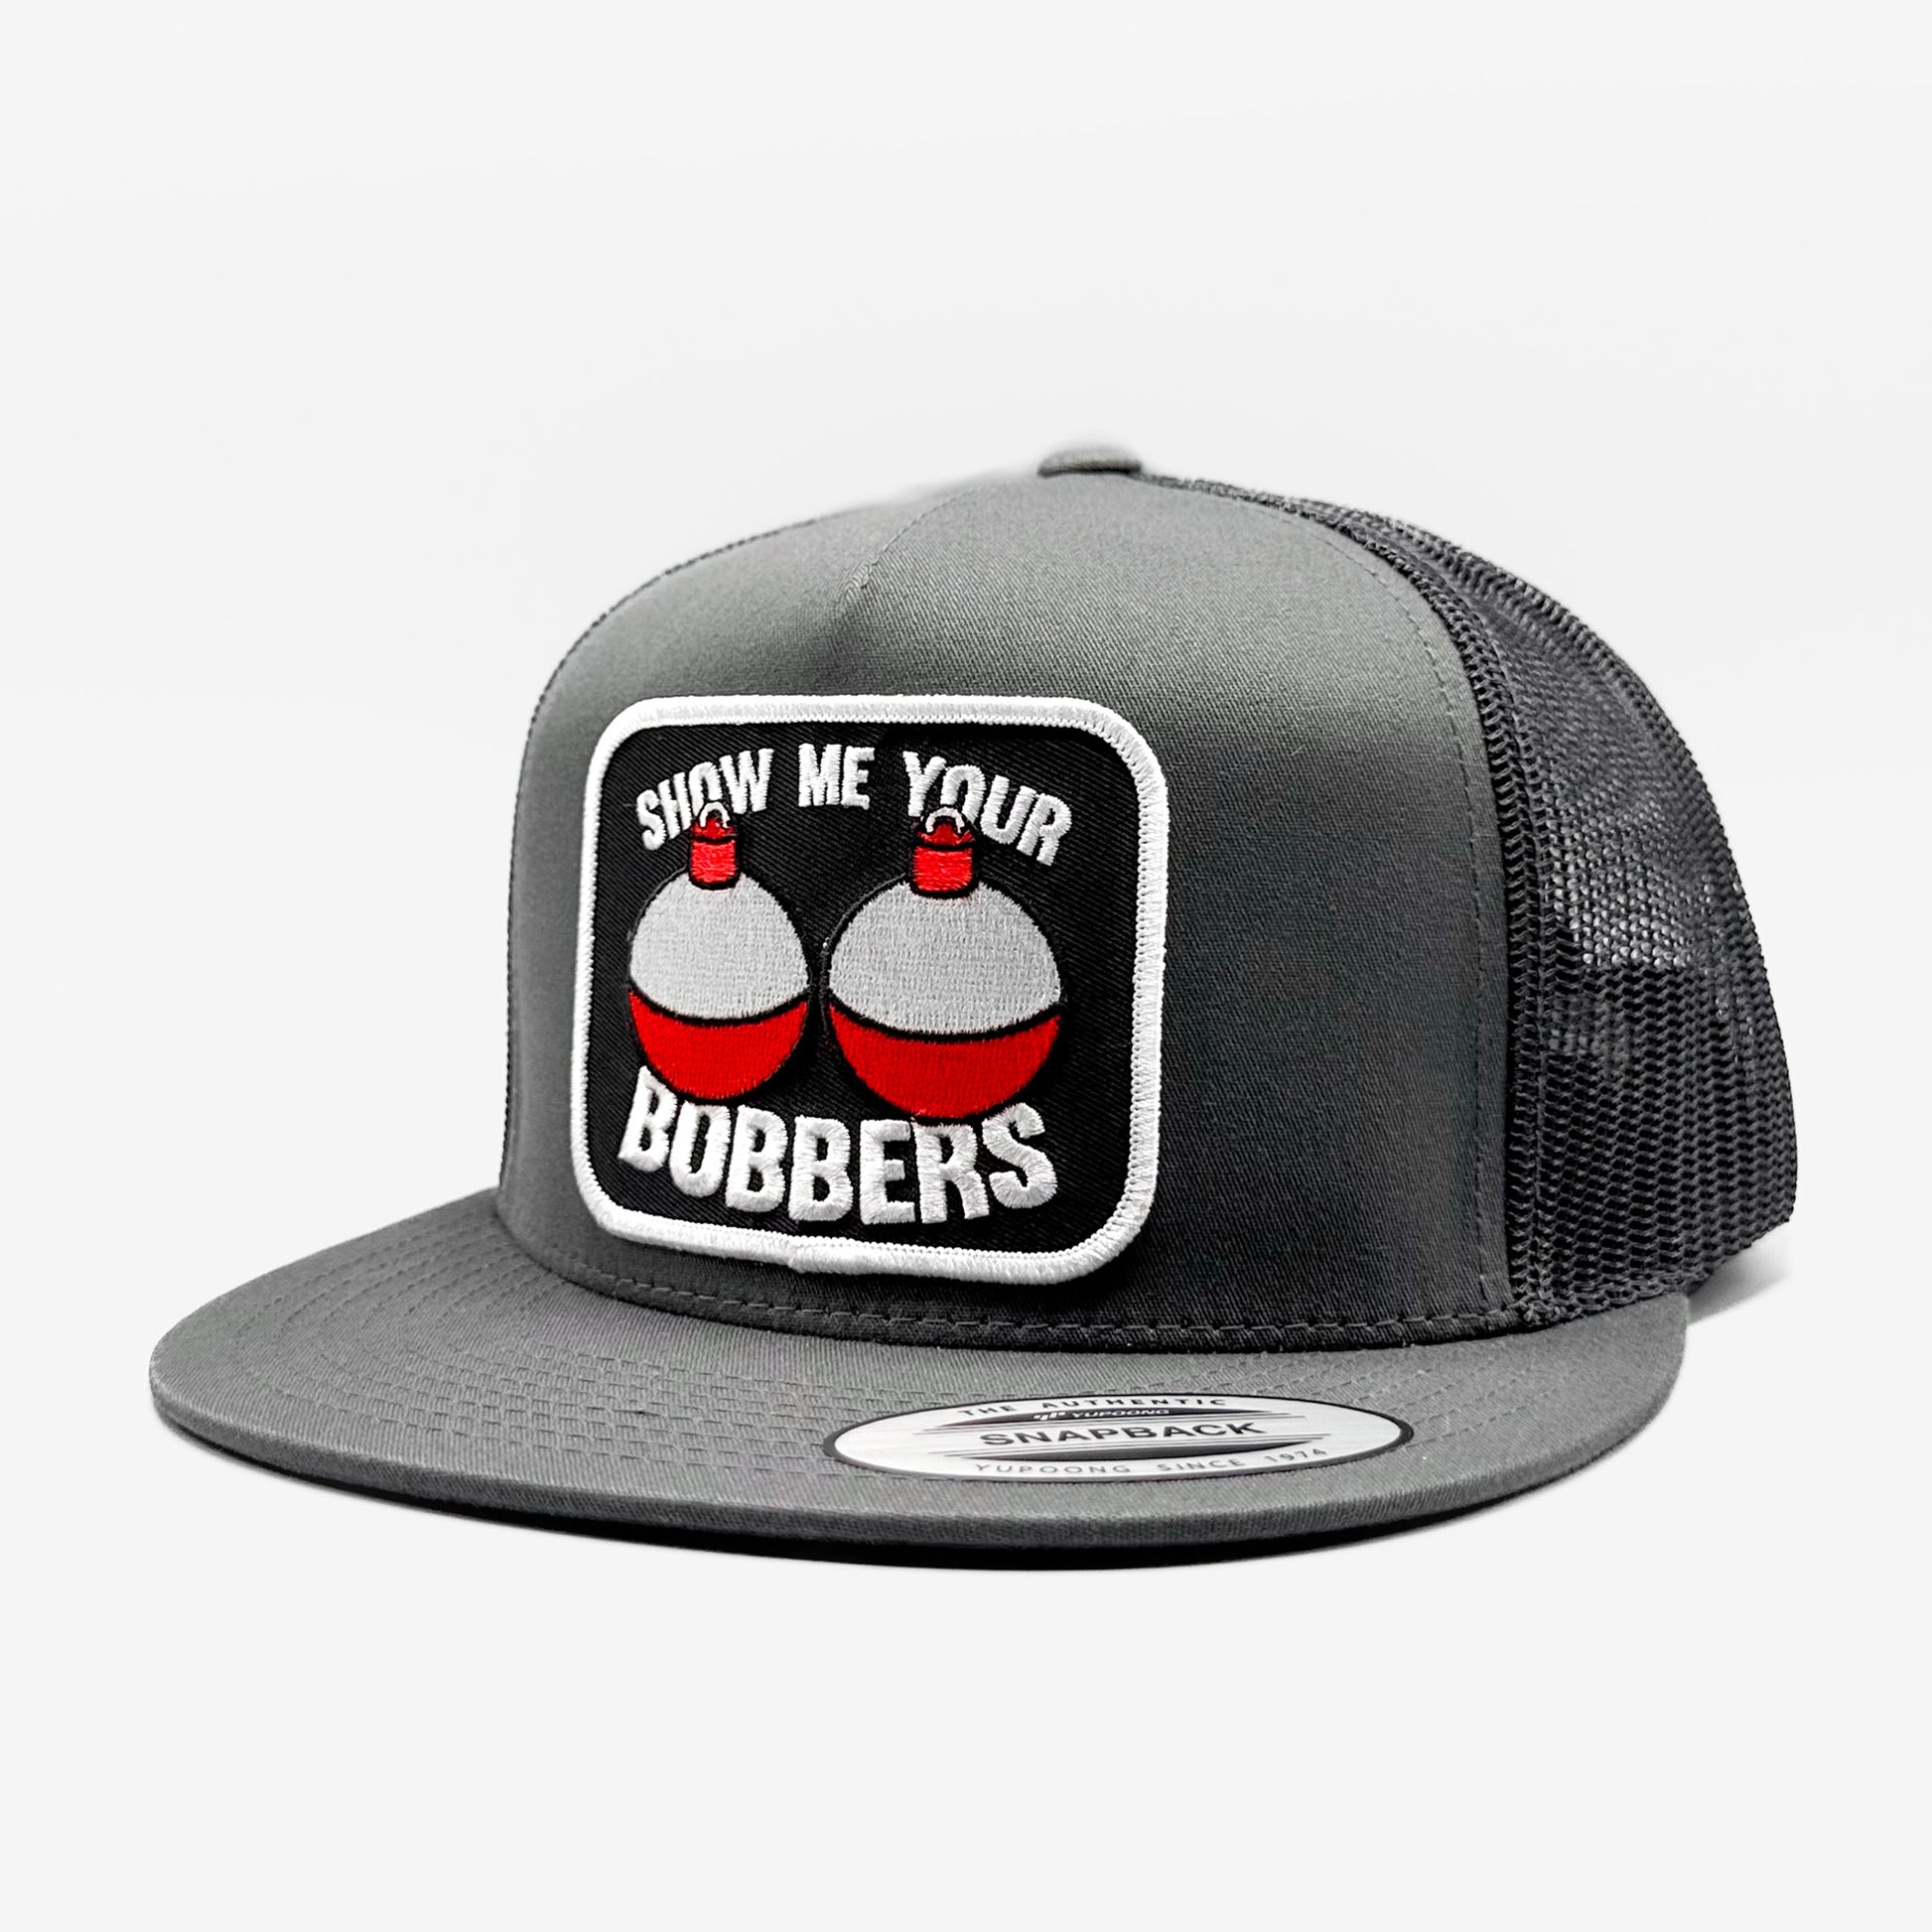 Show Me Your Bobbers Funny Fishing Trucker Hat, Gray Yupoong 6006 – Vintage  Truckers